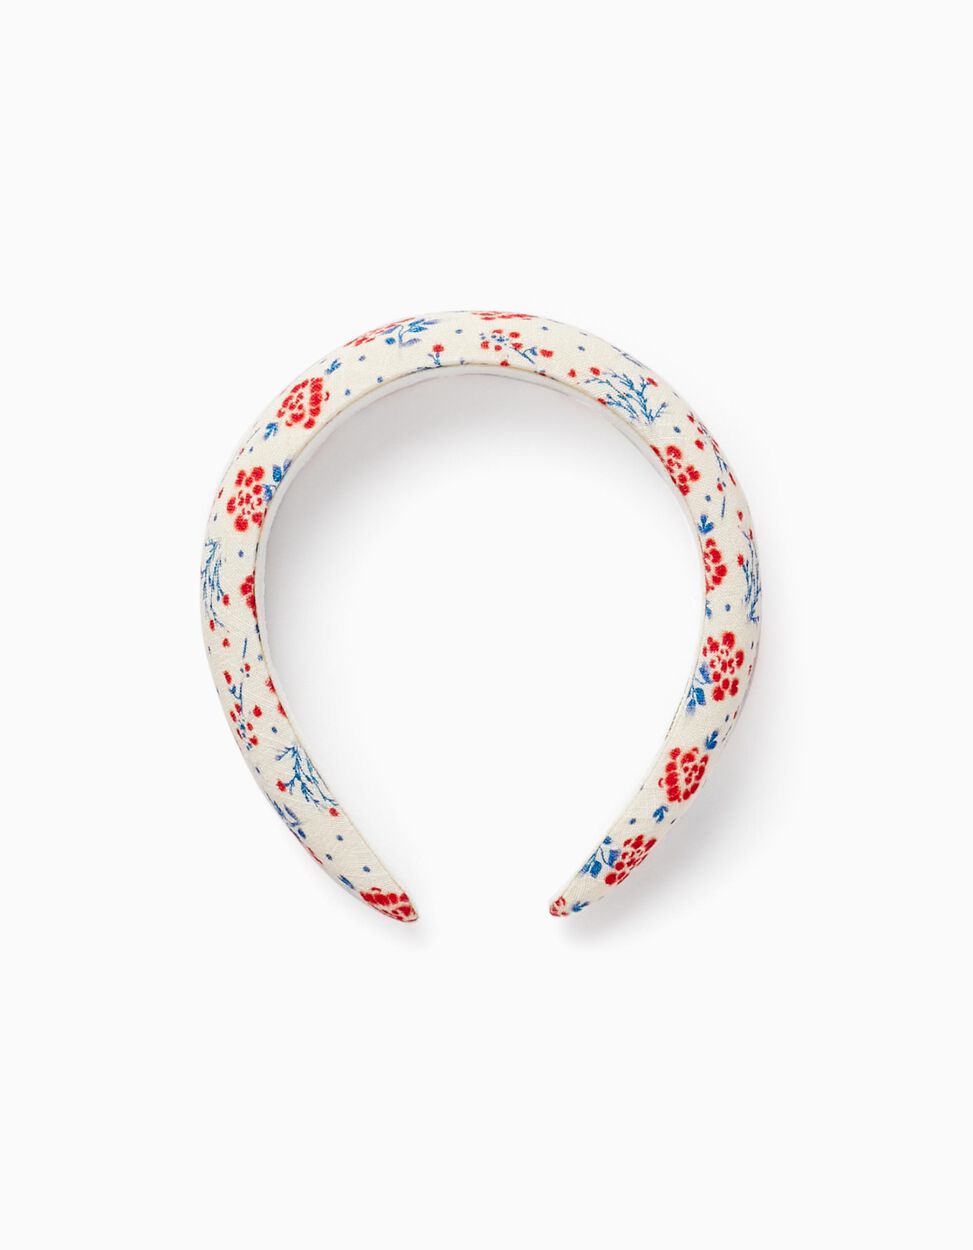 Buy Online Headband with Floral Pattern for Girls, Beige/Blue/Red